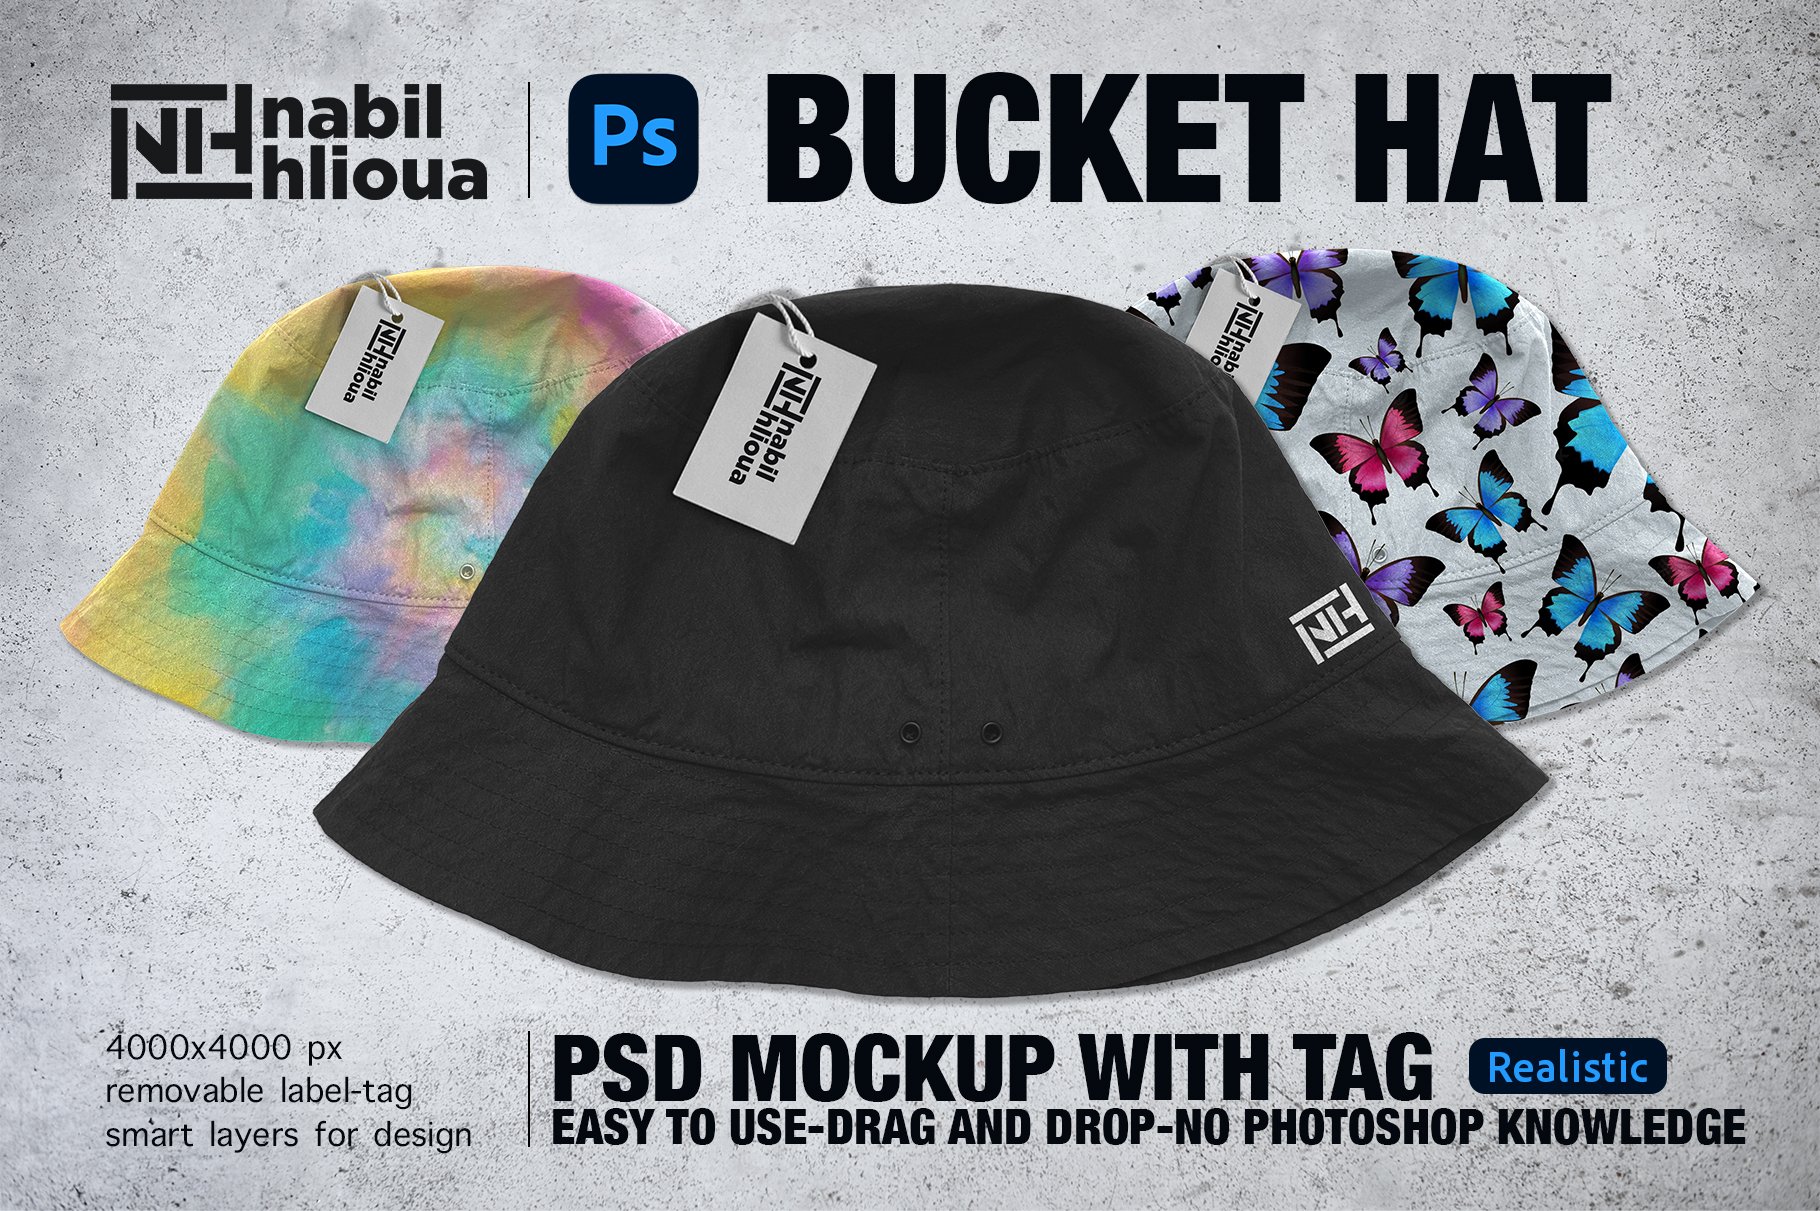 REALISTIC BUCKET HAT PSD Mockup cover image.